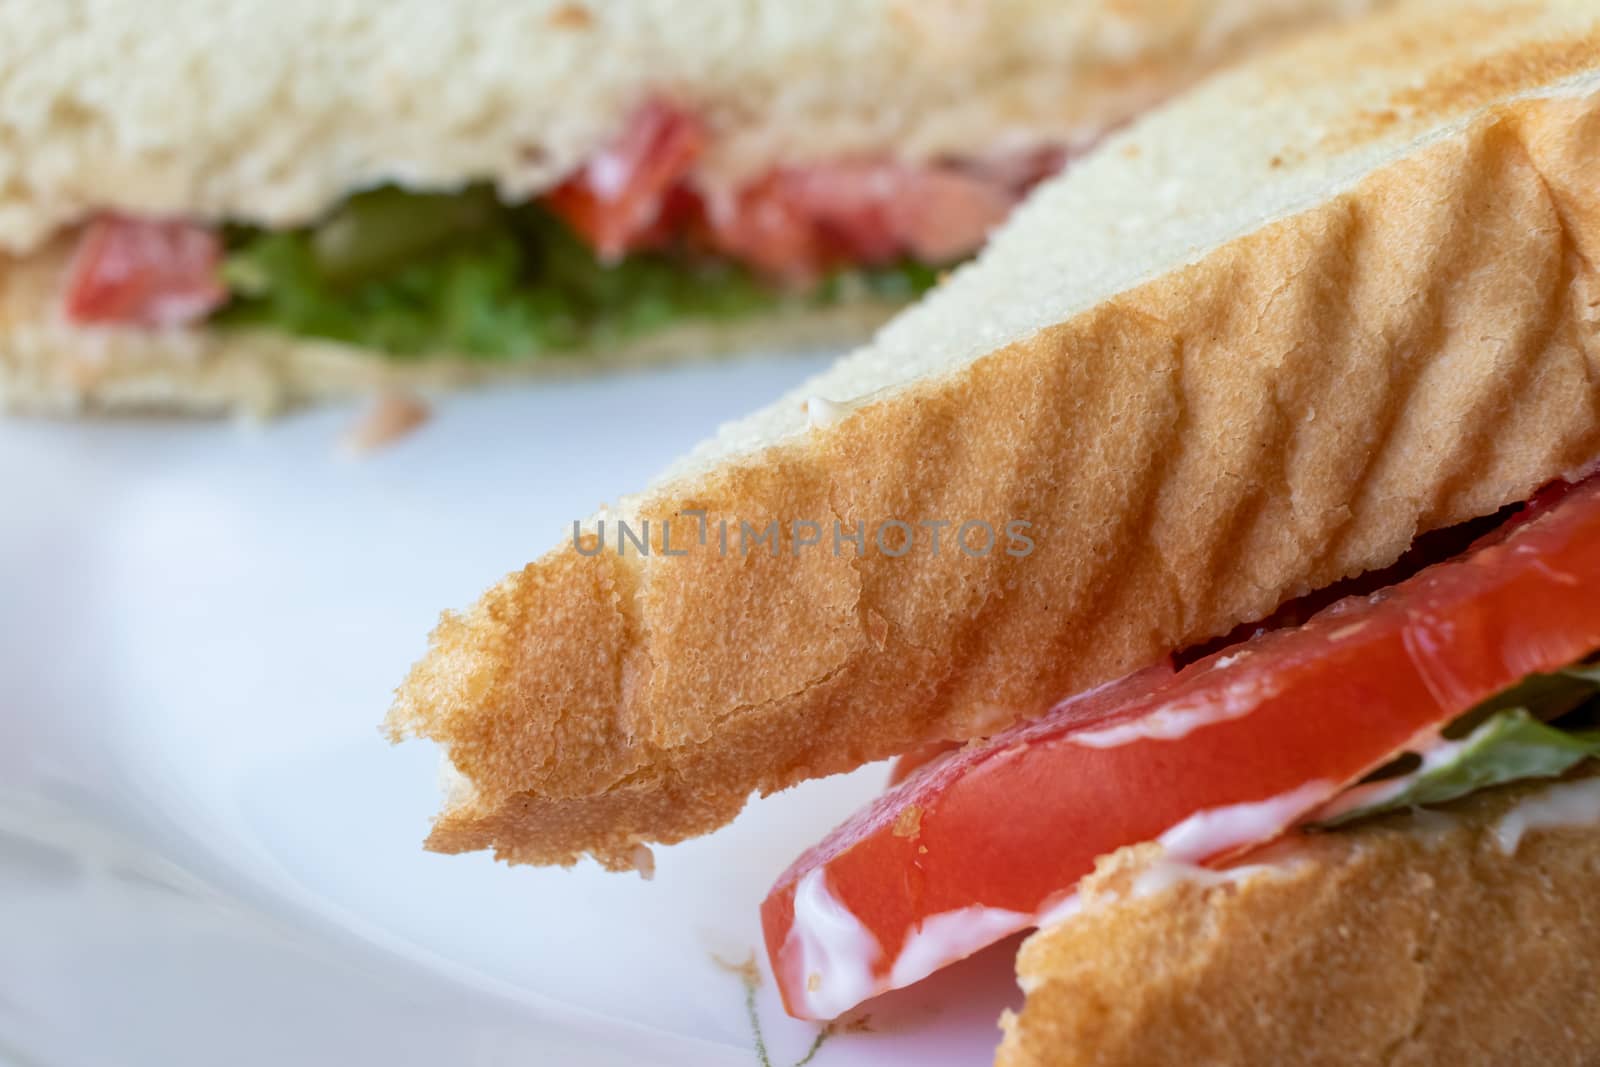 A toasted tomato sandwich with lettuce and mayonaise sits on a white plate, cut diagonally and served for lunch. A close-up view of one side obscures a blurred cross-section behind it.